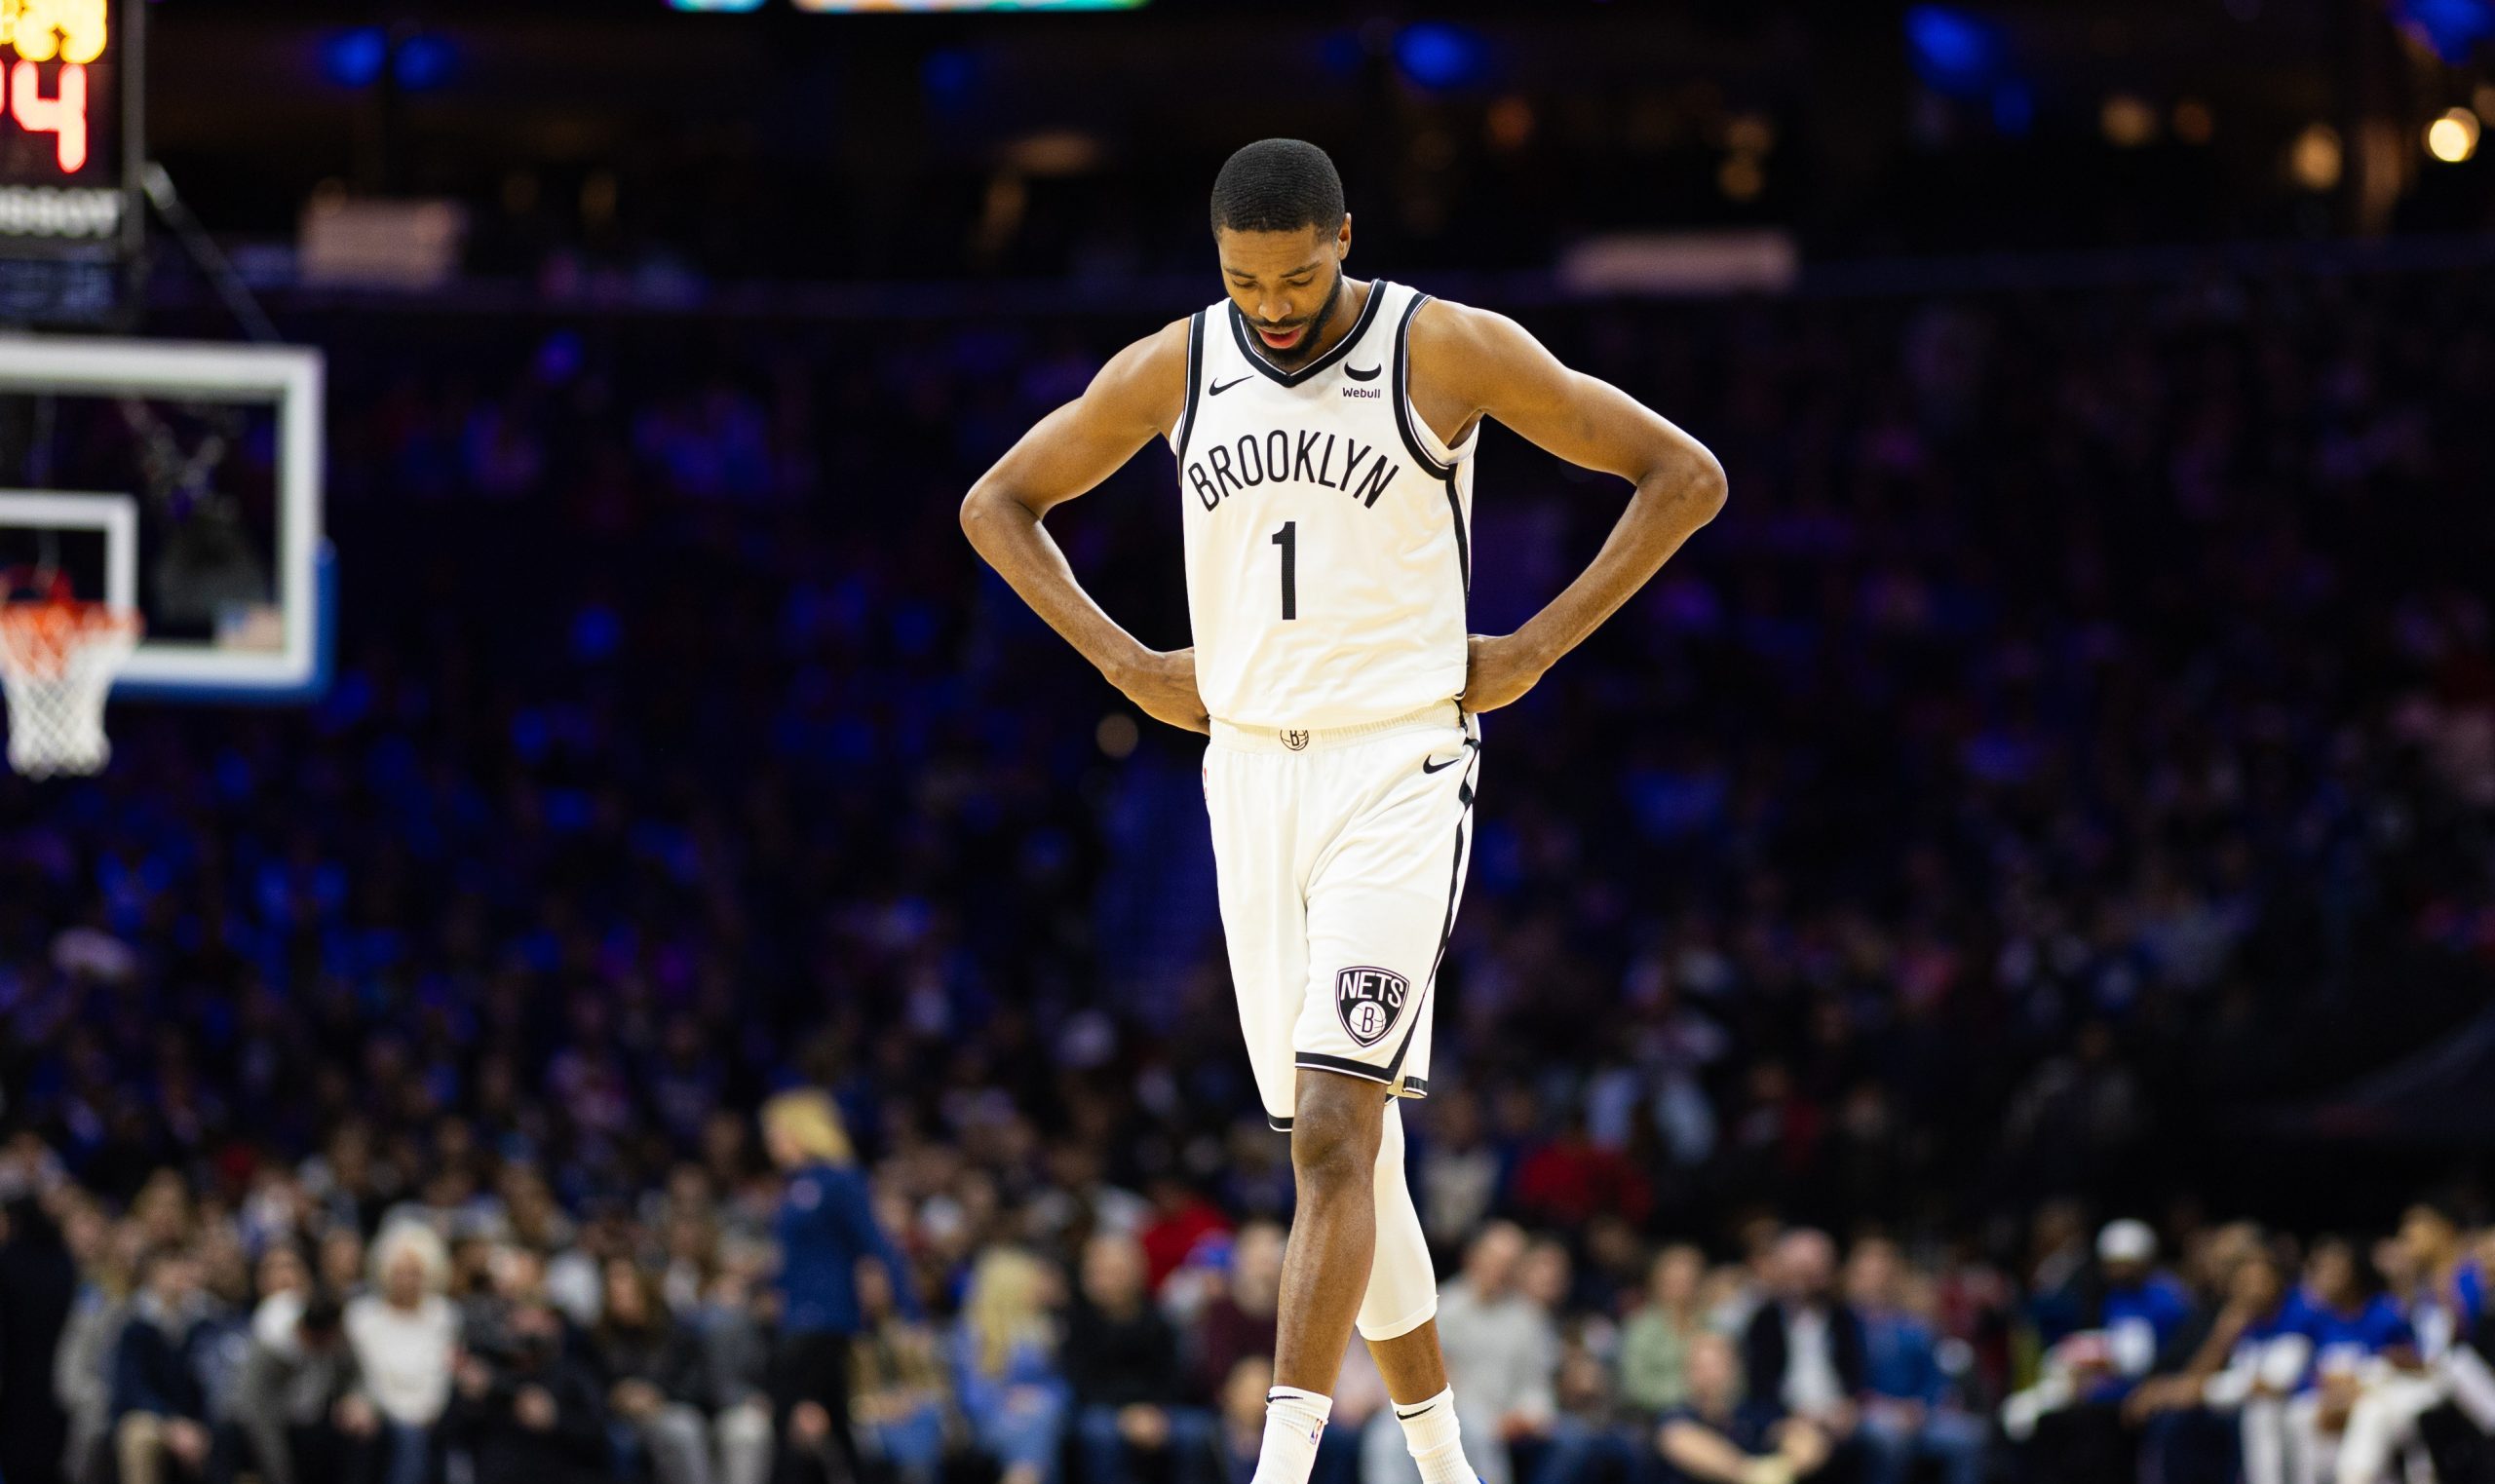 Nets star Mikal Bridges addressed his desire to stay with the team after Monday's firing of coach Jacque Vaughn. Photo Credit: Bill Streicher-USA TODAY Sports